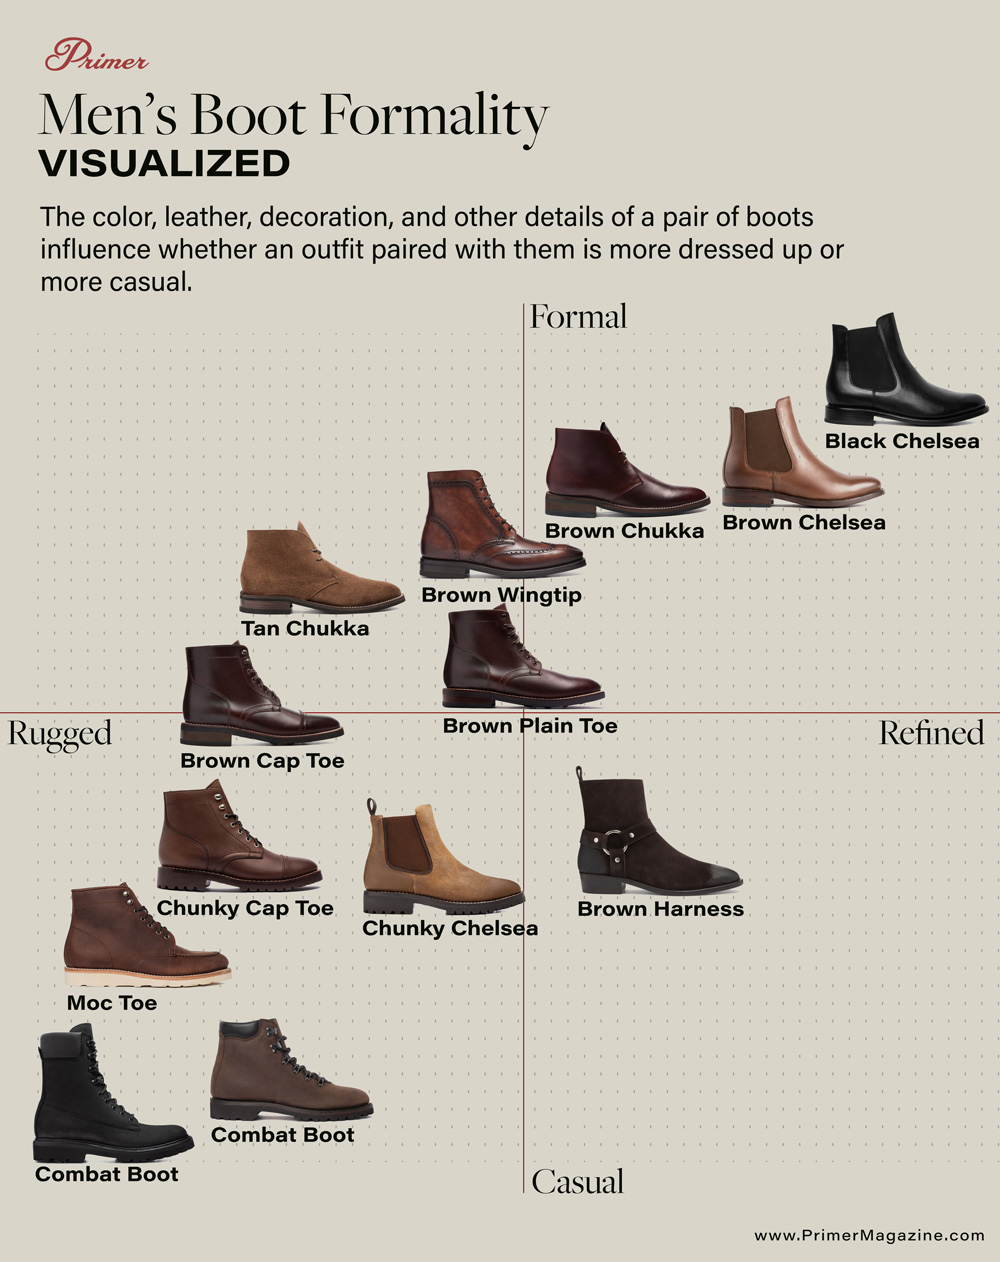 Men's boot formality visualized chart: The color, leather, decoration, and other details of a pair of boots influence whether an outfit paired with them is more dressed up or more casual.